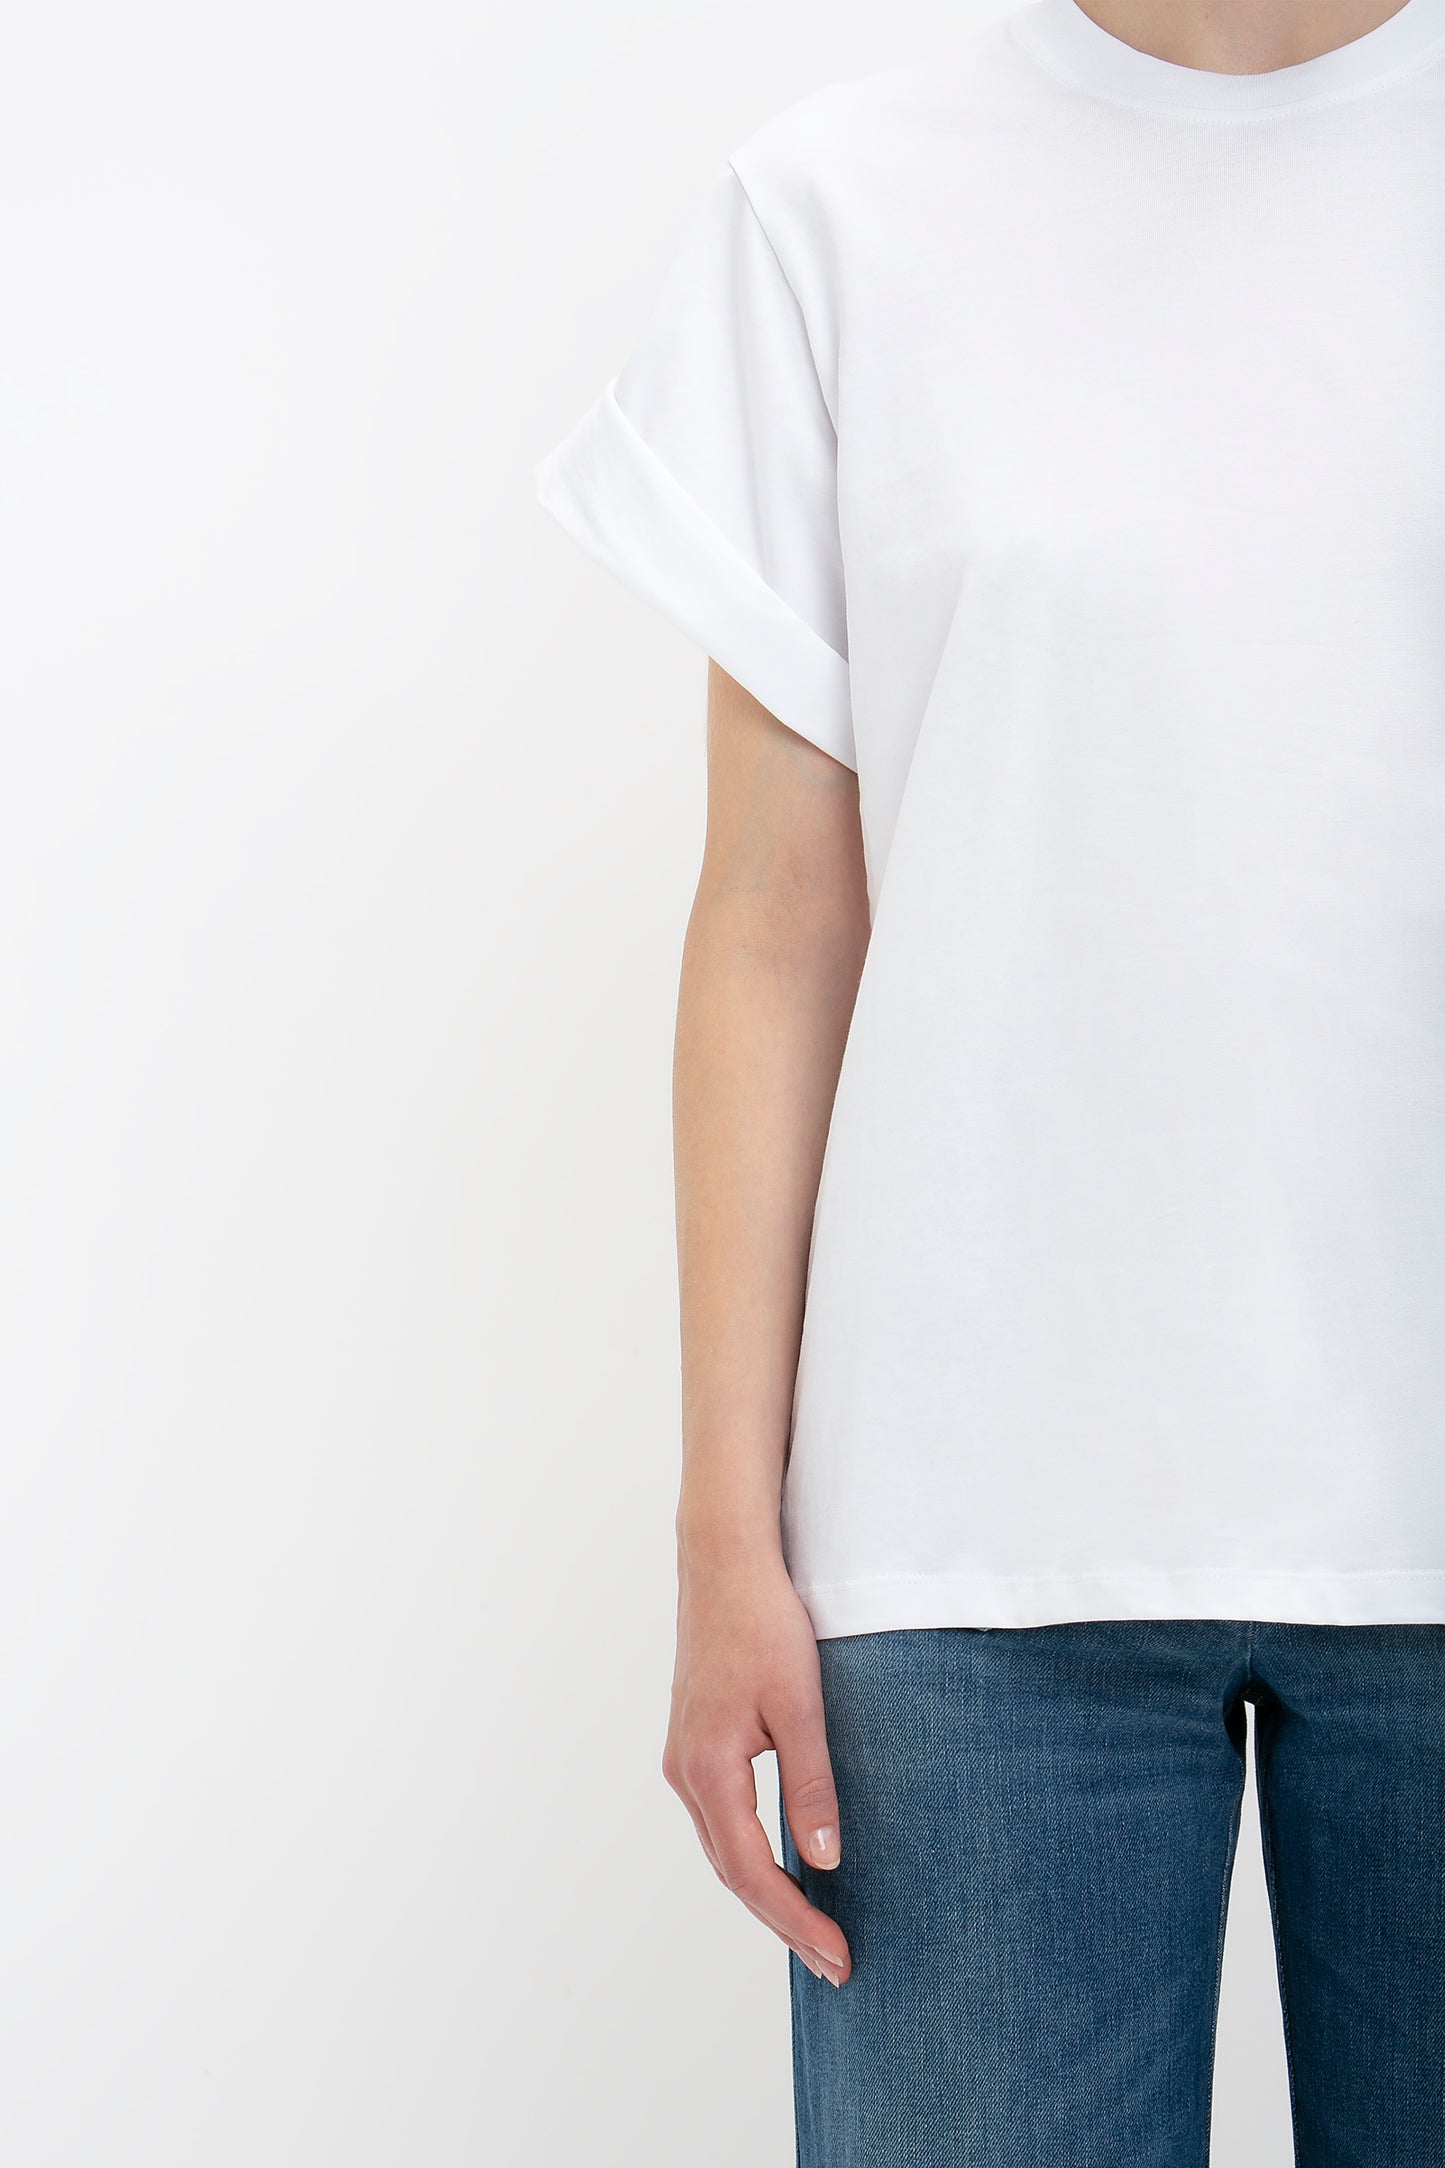 A person wearing an oversized Victoria Beckham white T-shirt and blue jeans, shown from the waist down to mid-thigh, with a focus on the T-shirt.